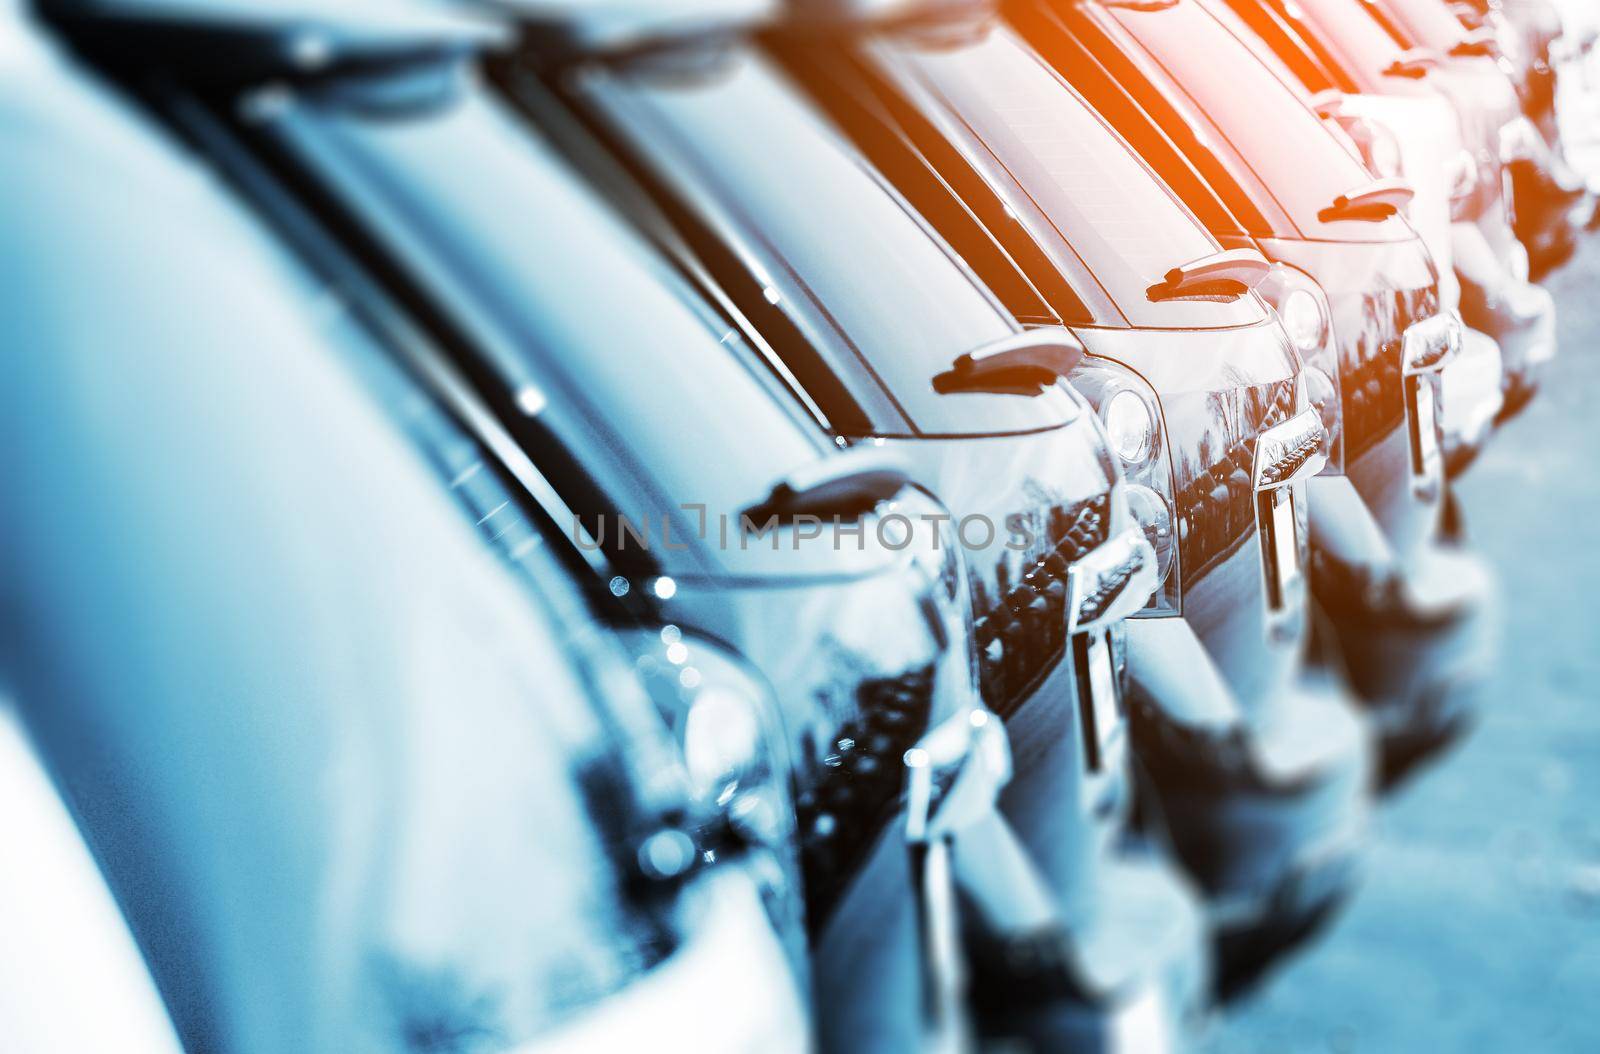 New Vehicles in Stock Closeup Photo with Color Grading. Brand New Cars For Sale in a Row. Cars Industry. by welcomia